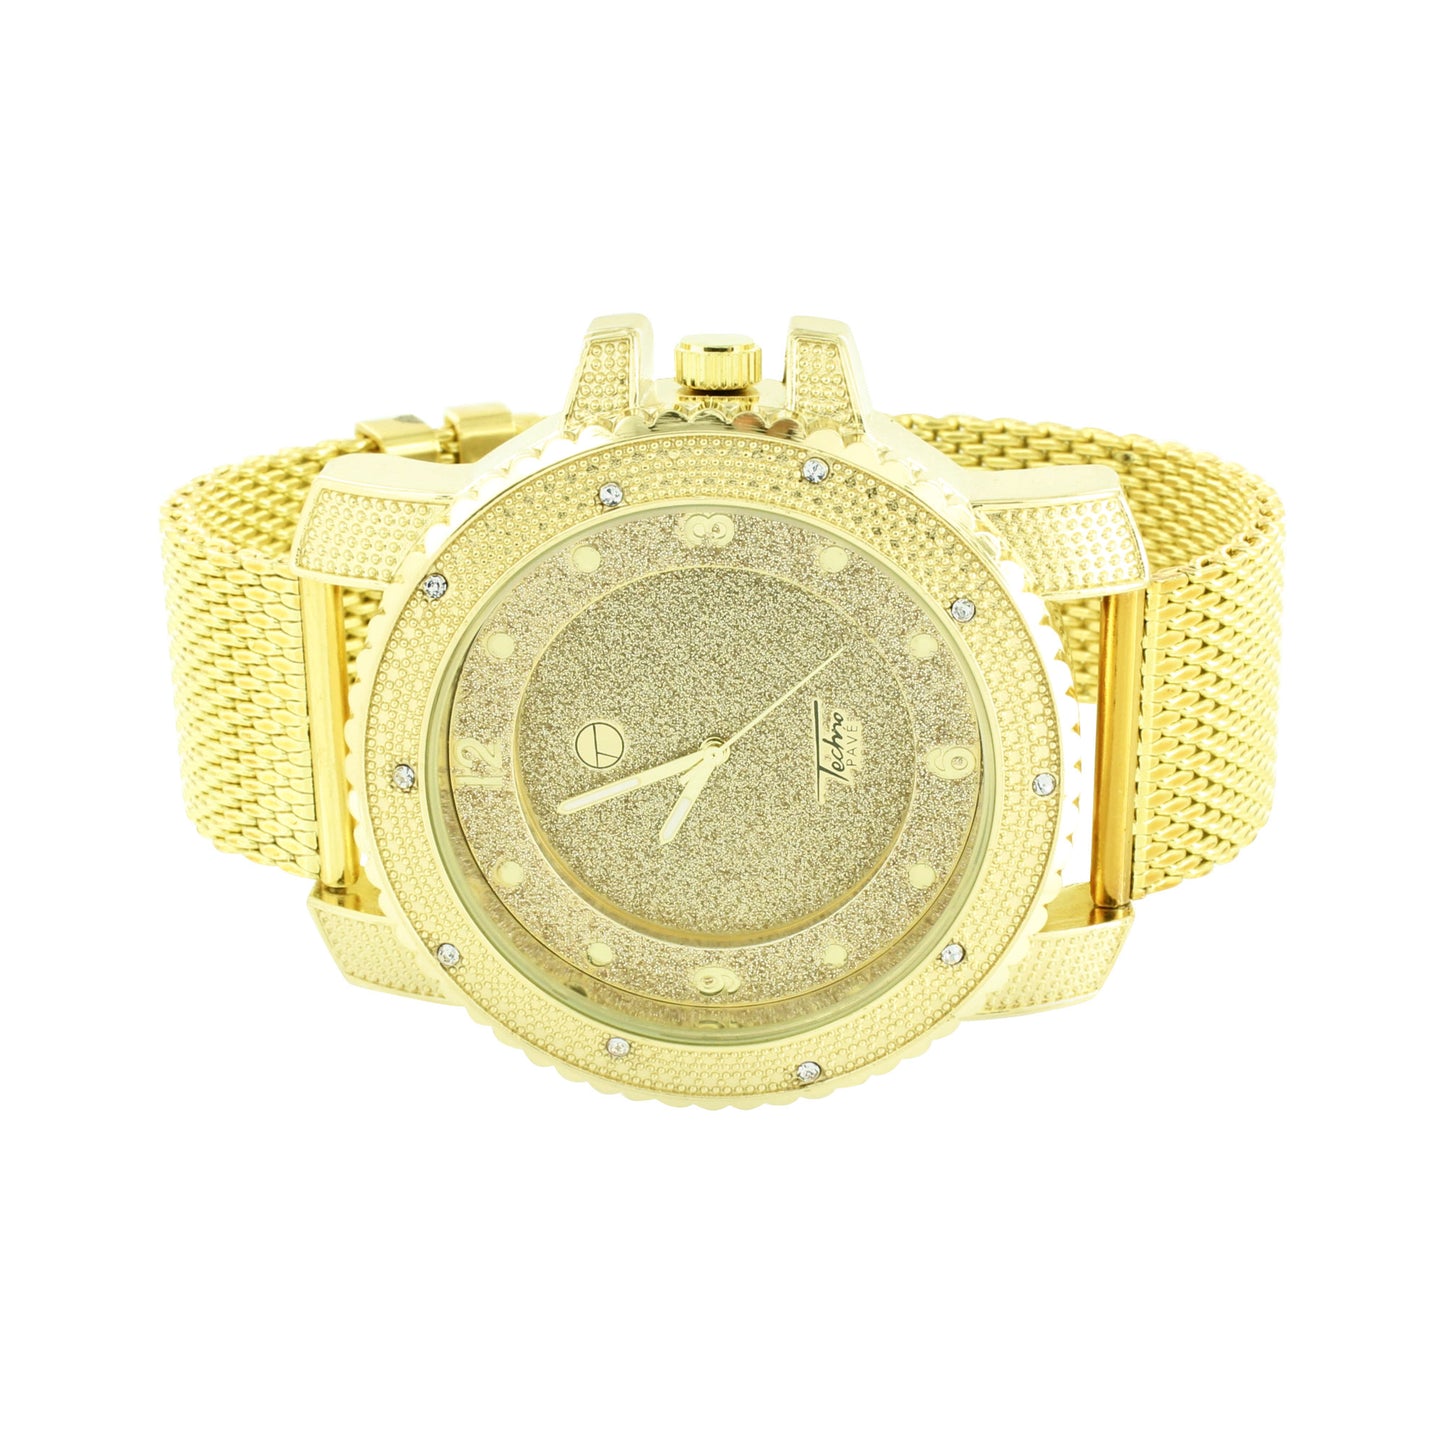 Simulated Diamond Watch Gold Finish Mens Mesh Band Water Resistant Classy Techno